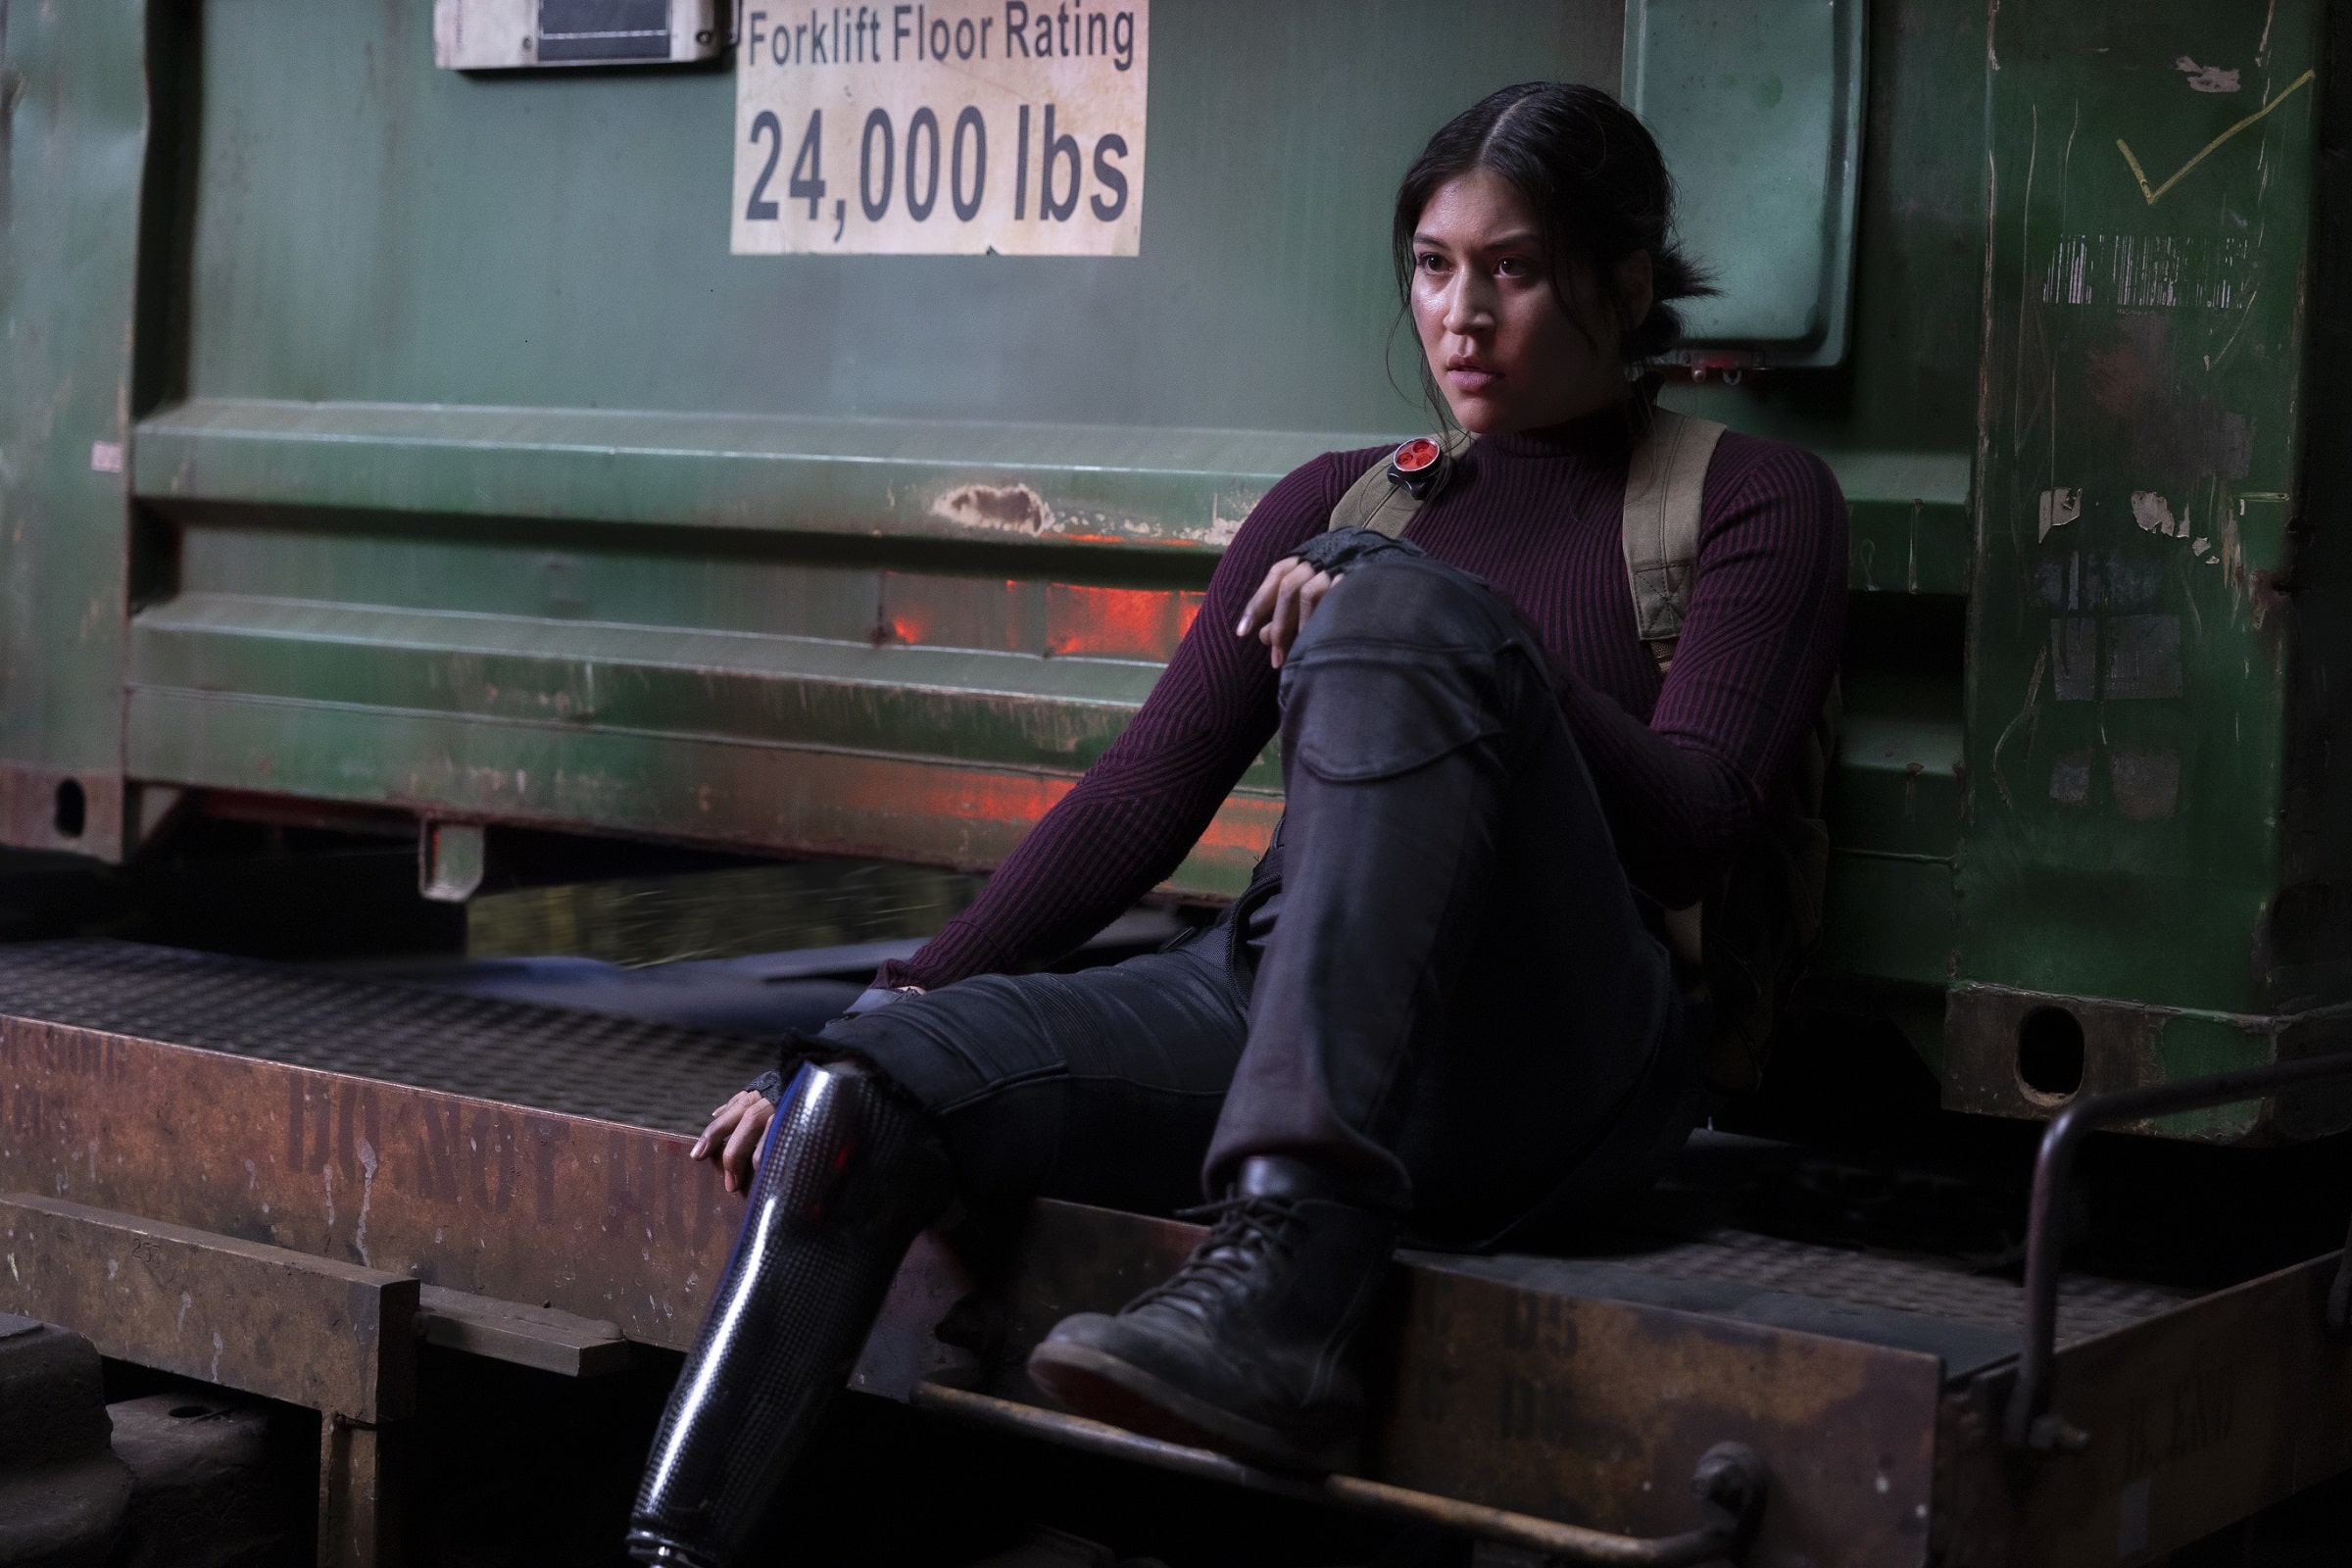 A Native American woman with long, tied-back dark hair and a right-leg prosthesis leans back against a green cargo container on a train. She looks frustrated and/or exhausted.